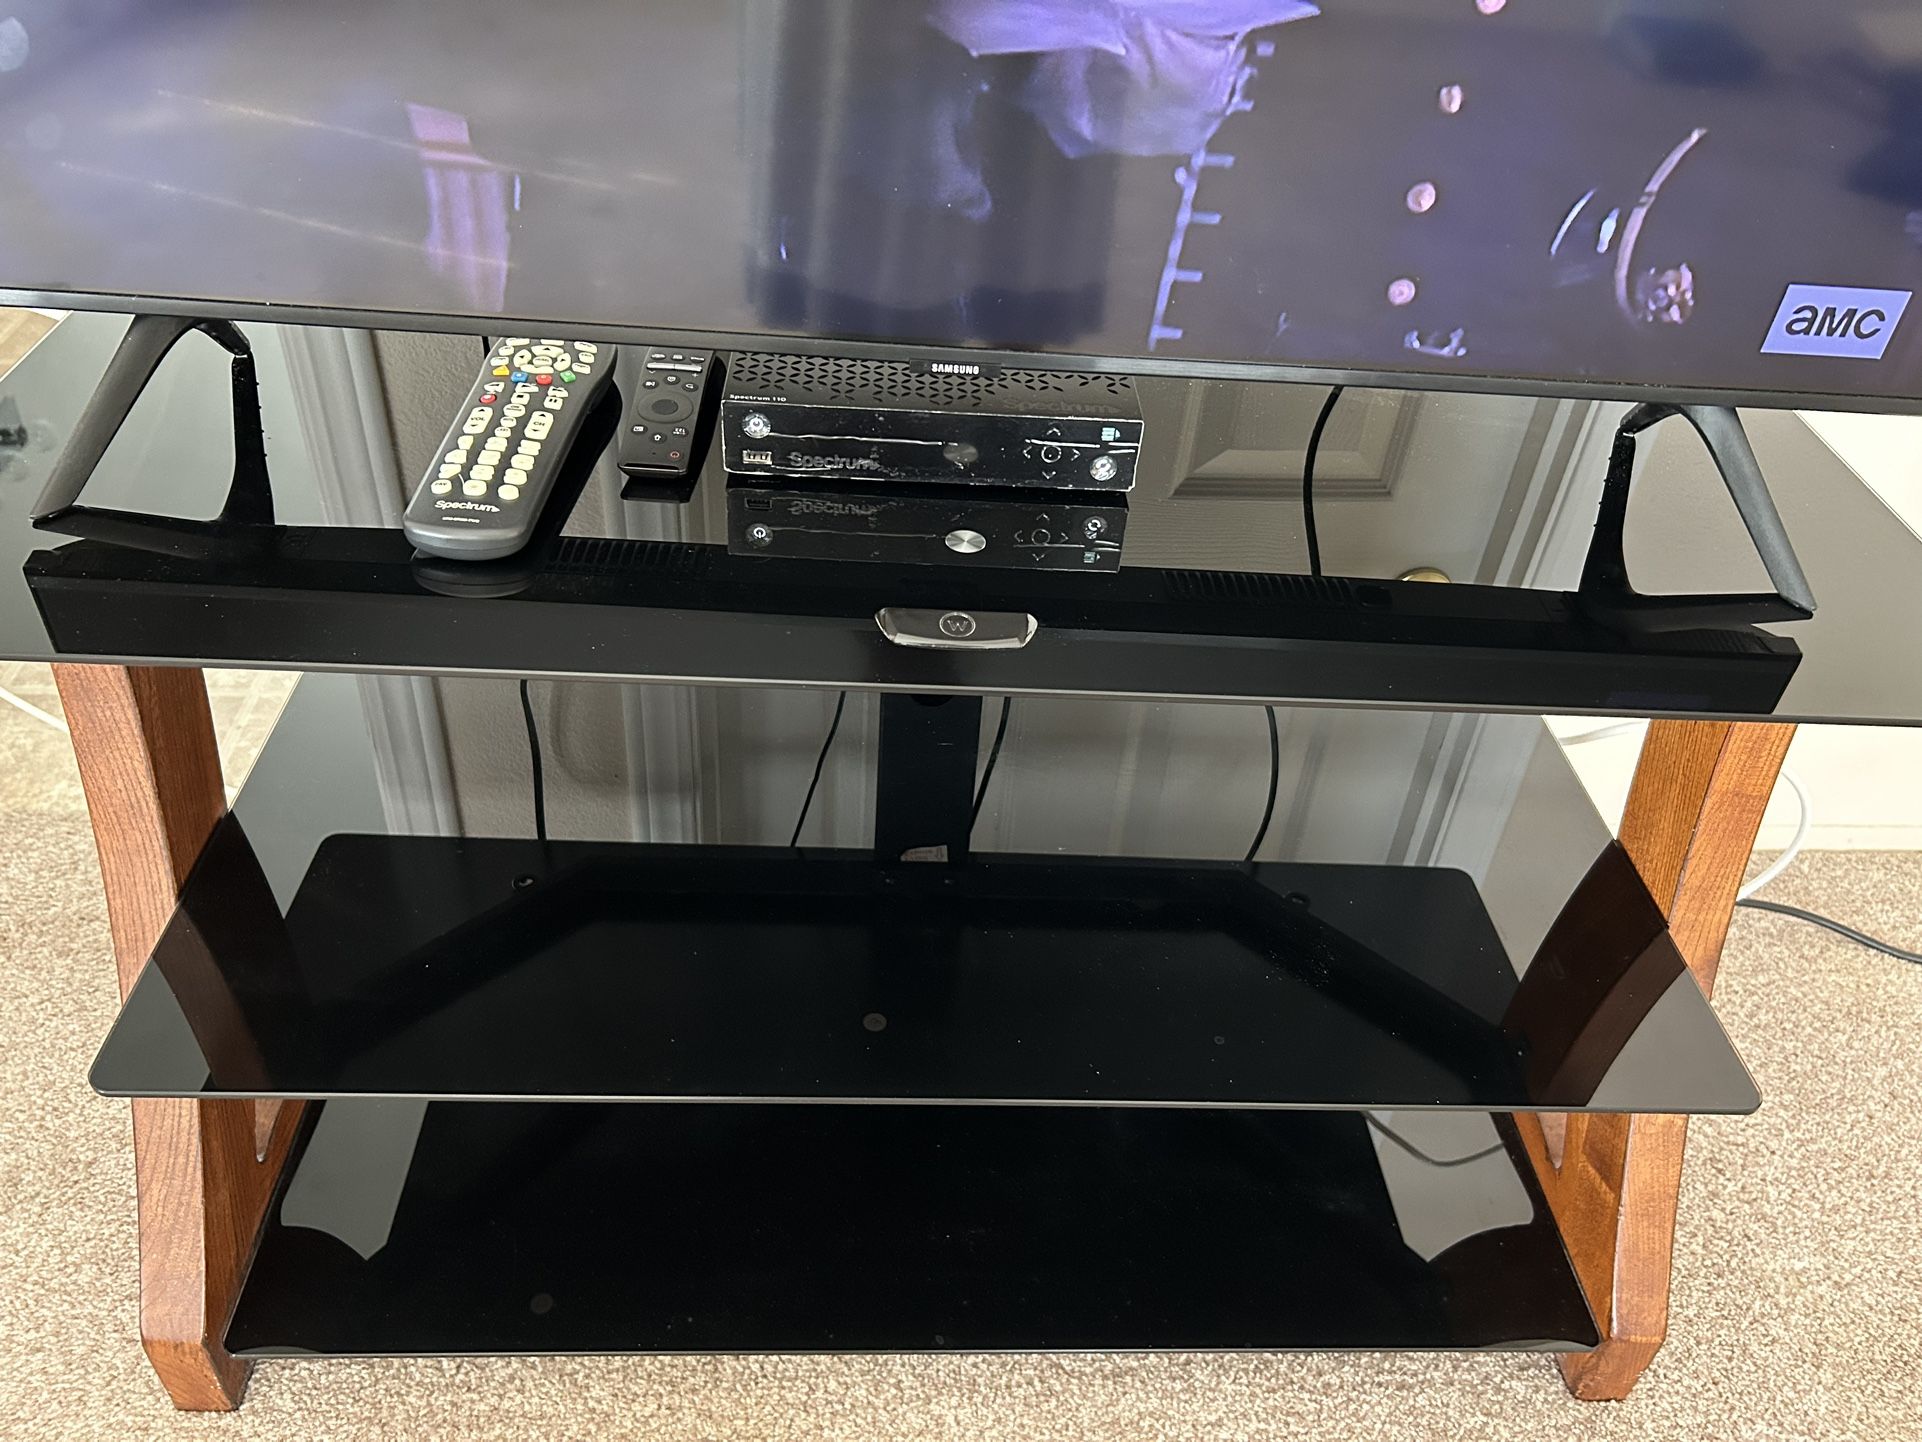 3 Shelf Television Stand Excellent Condition 